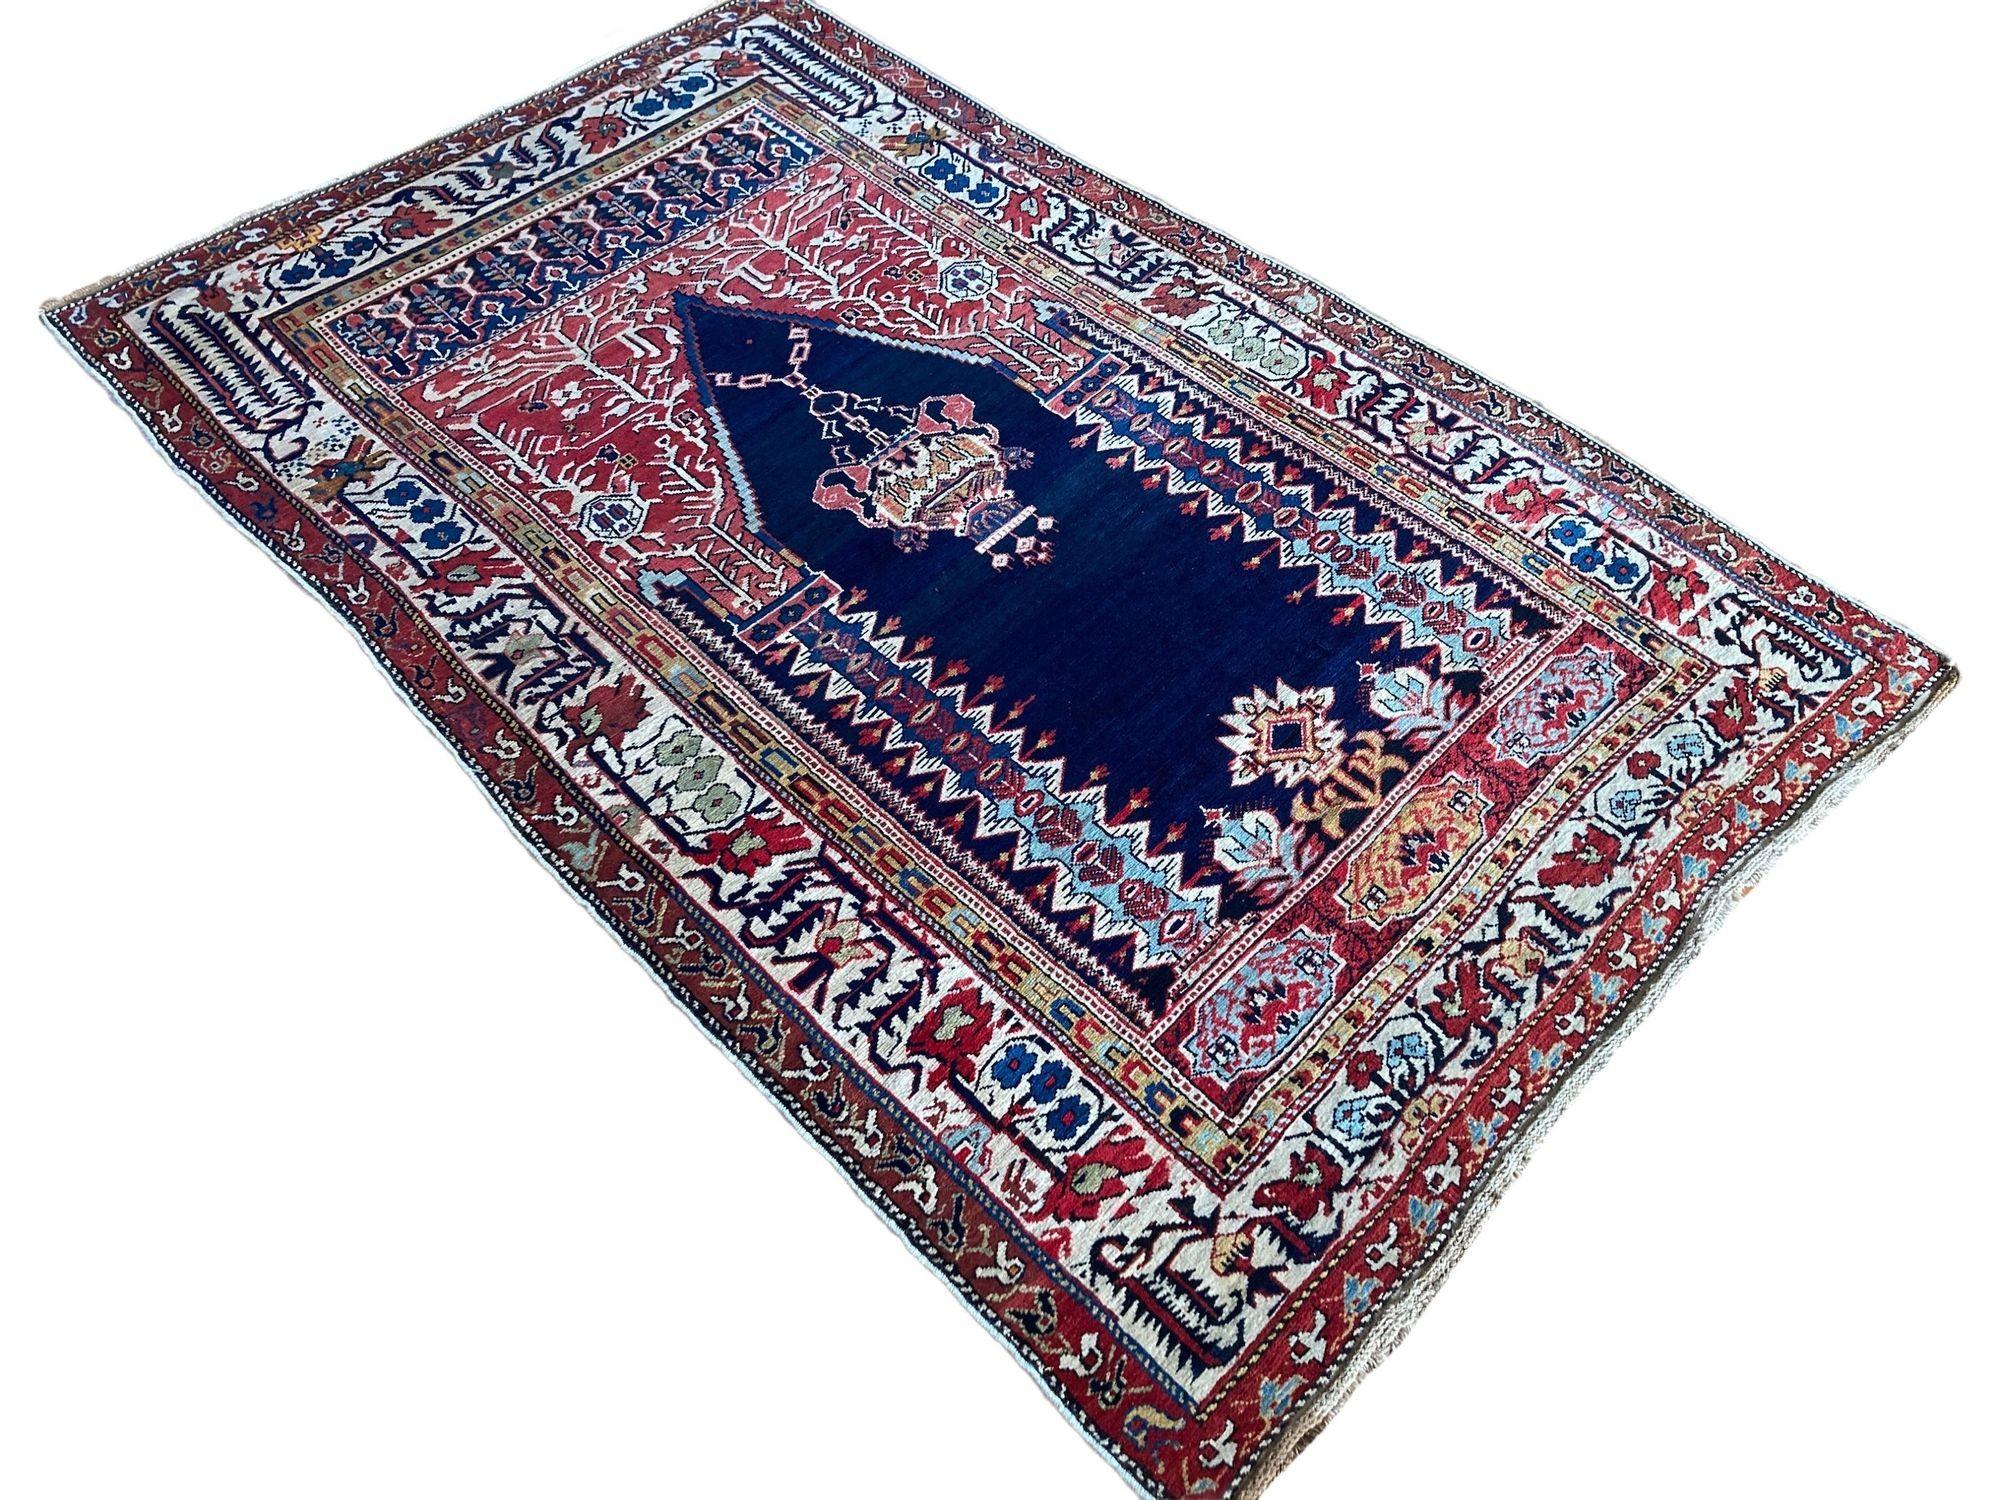 Antique Caucasian Shirvan Rug 2.05m X 1.35m In Good Condition For Sale In St. Albans, GB